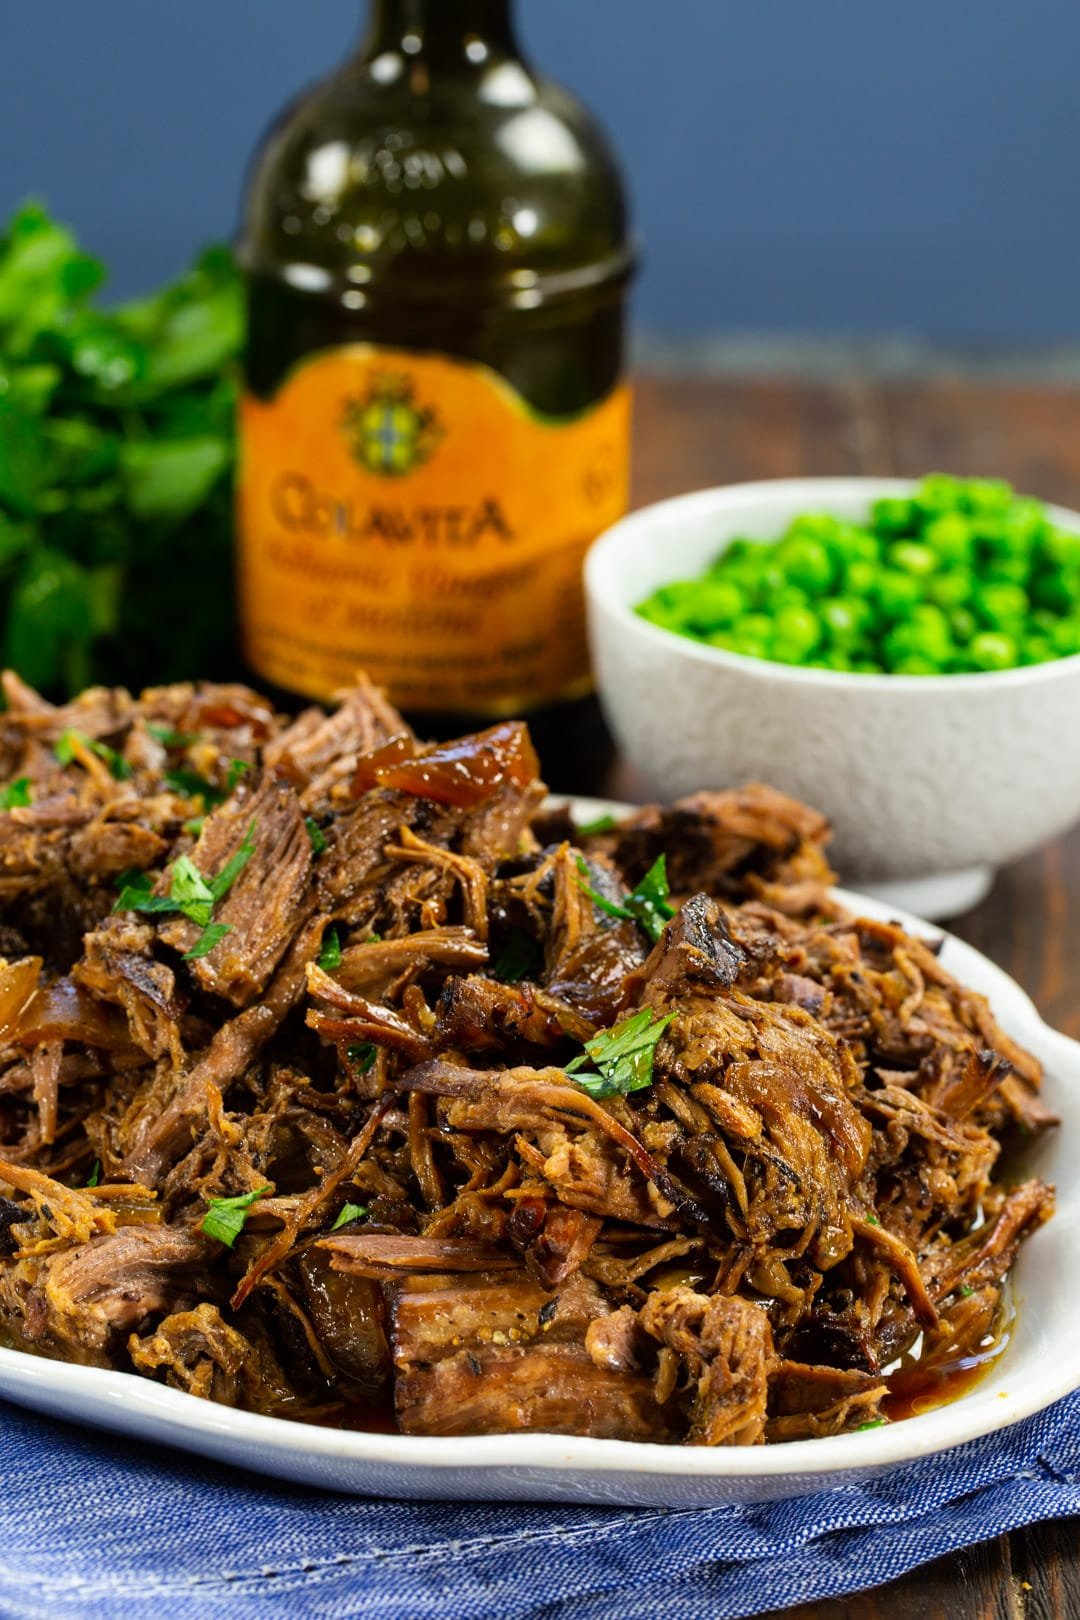 Shredded Beef on serving plate and bowl of peas.